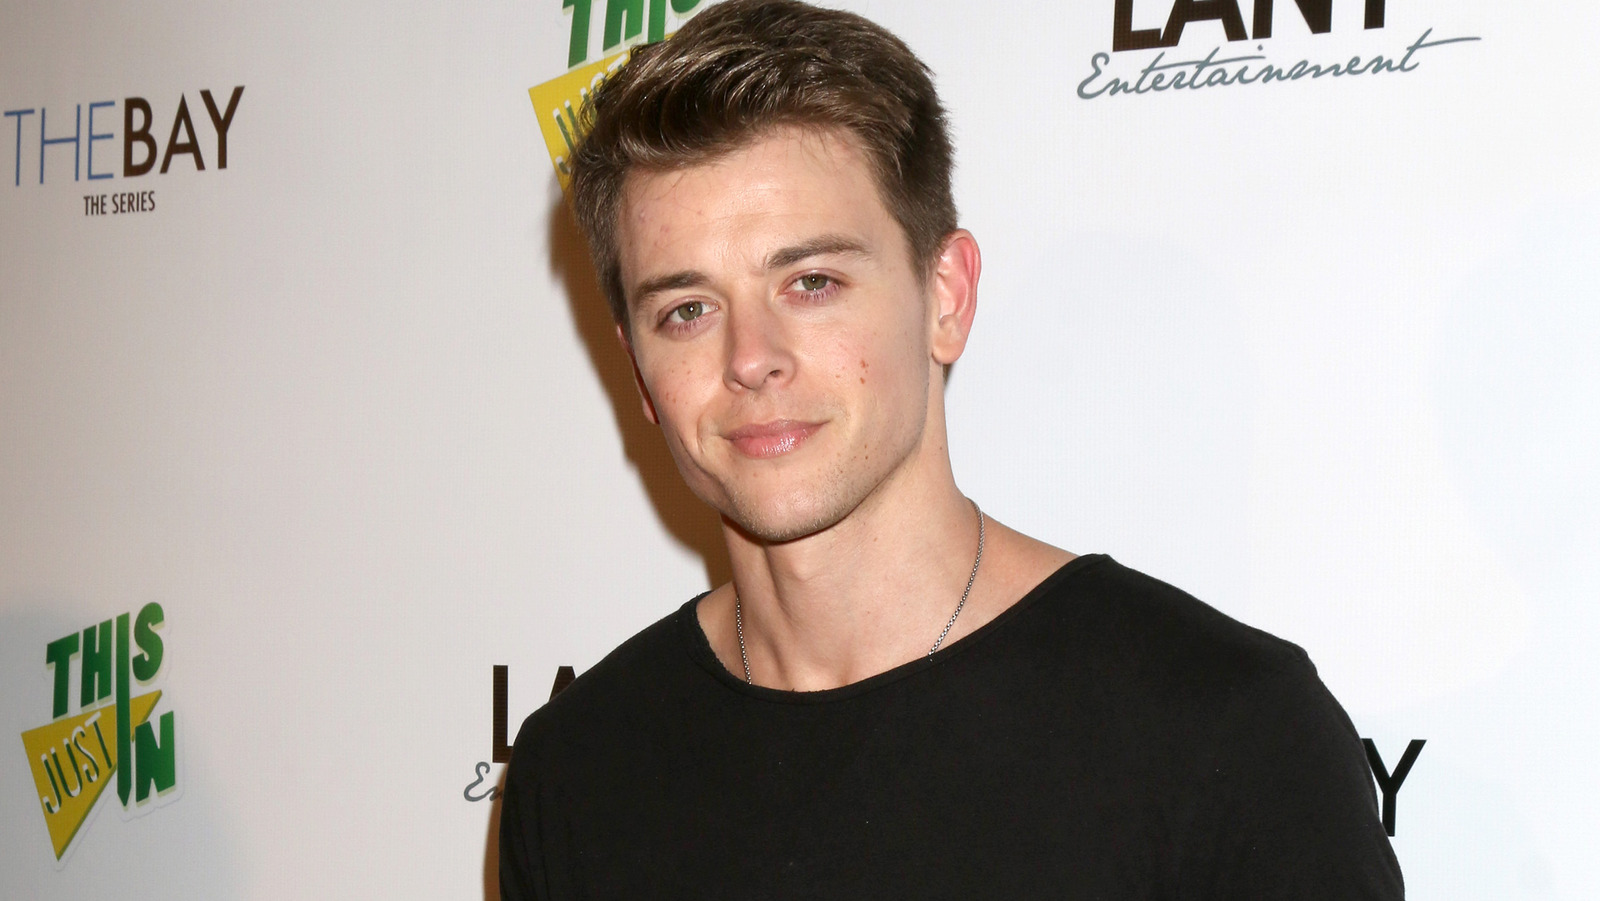 General Hospital Star Chad Duell Becomes First-Time Dad As He Welcomes Baby Boy – The List